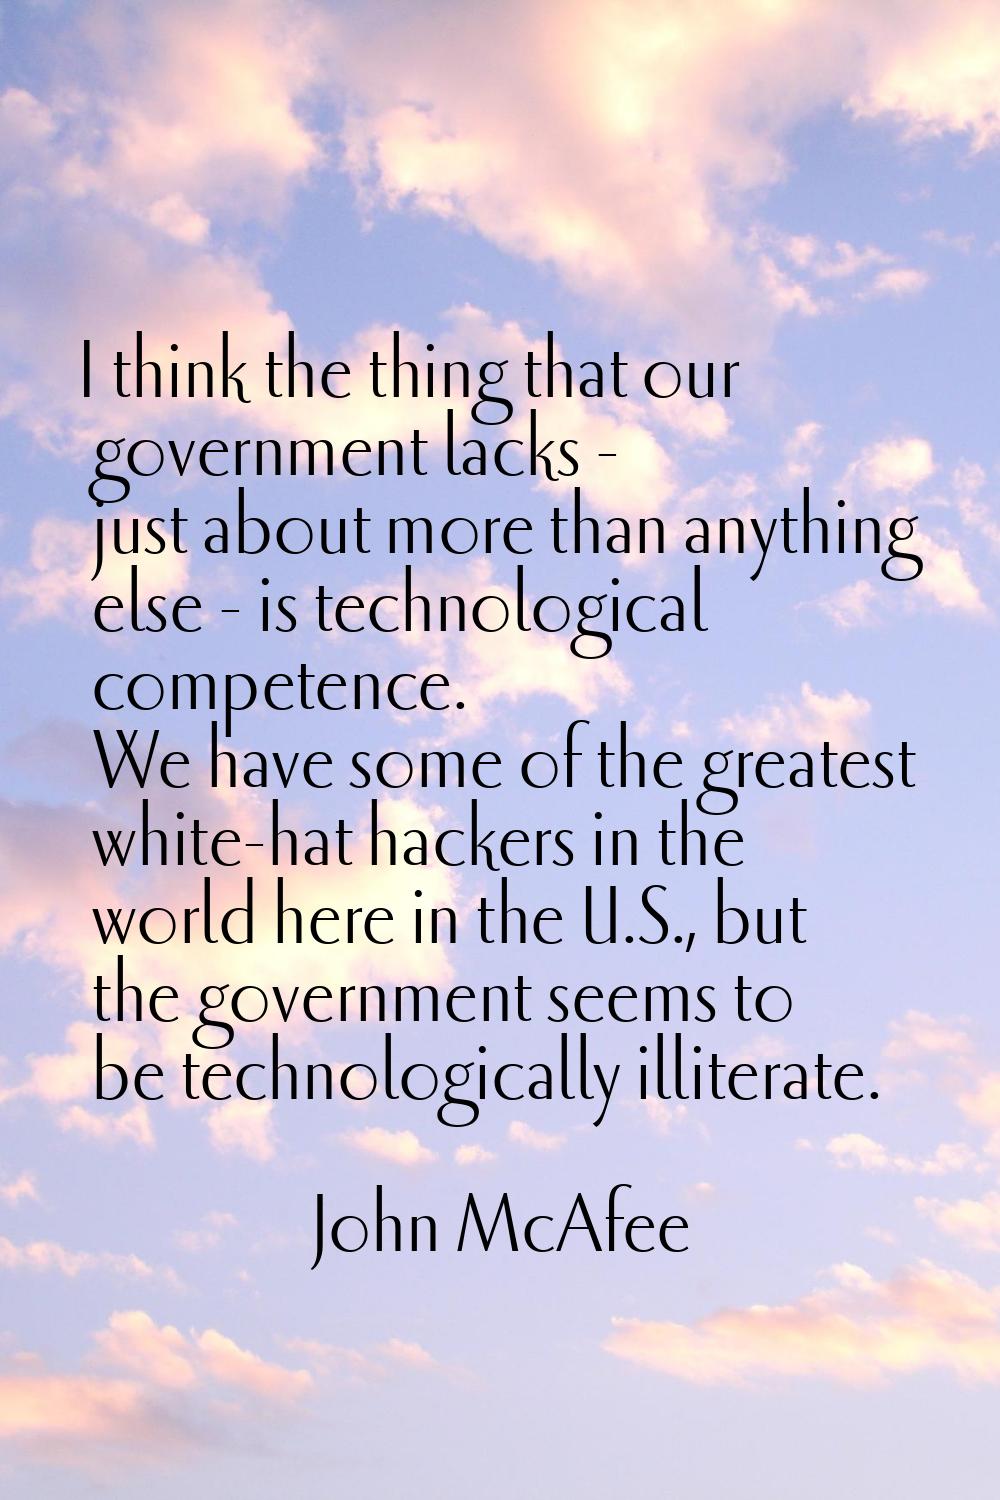 I think the thing that our government lacks - just about more than anything else - is technological